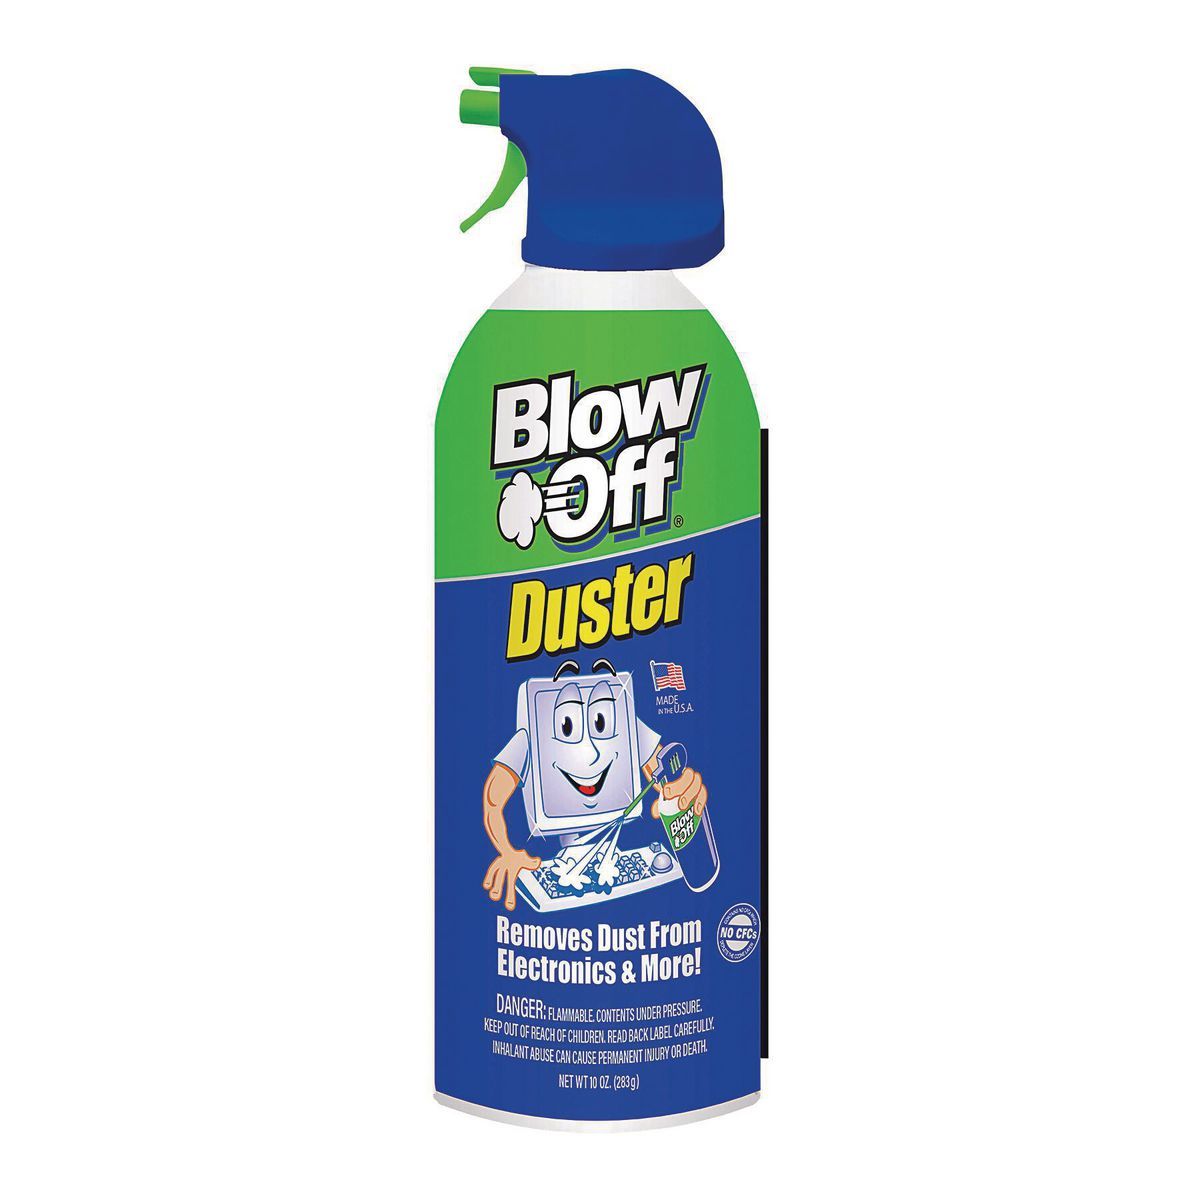 BLOW OFF DUSTER 10 Oz. Compressed Air